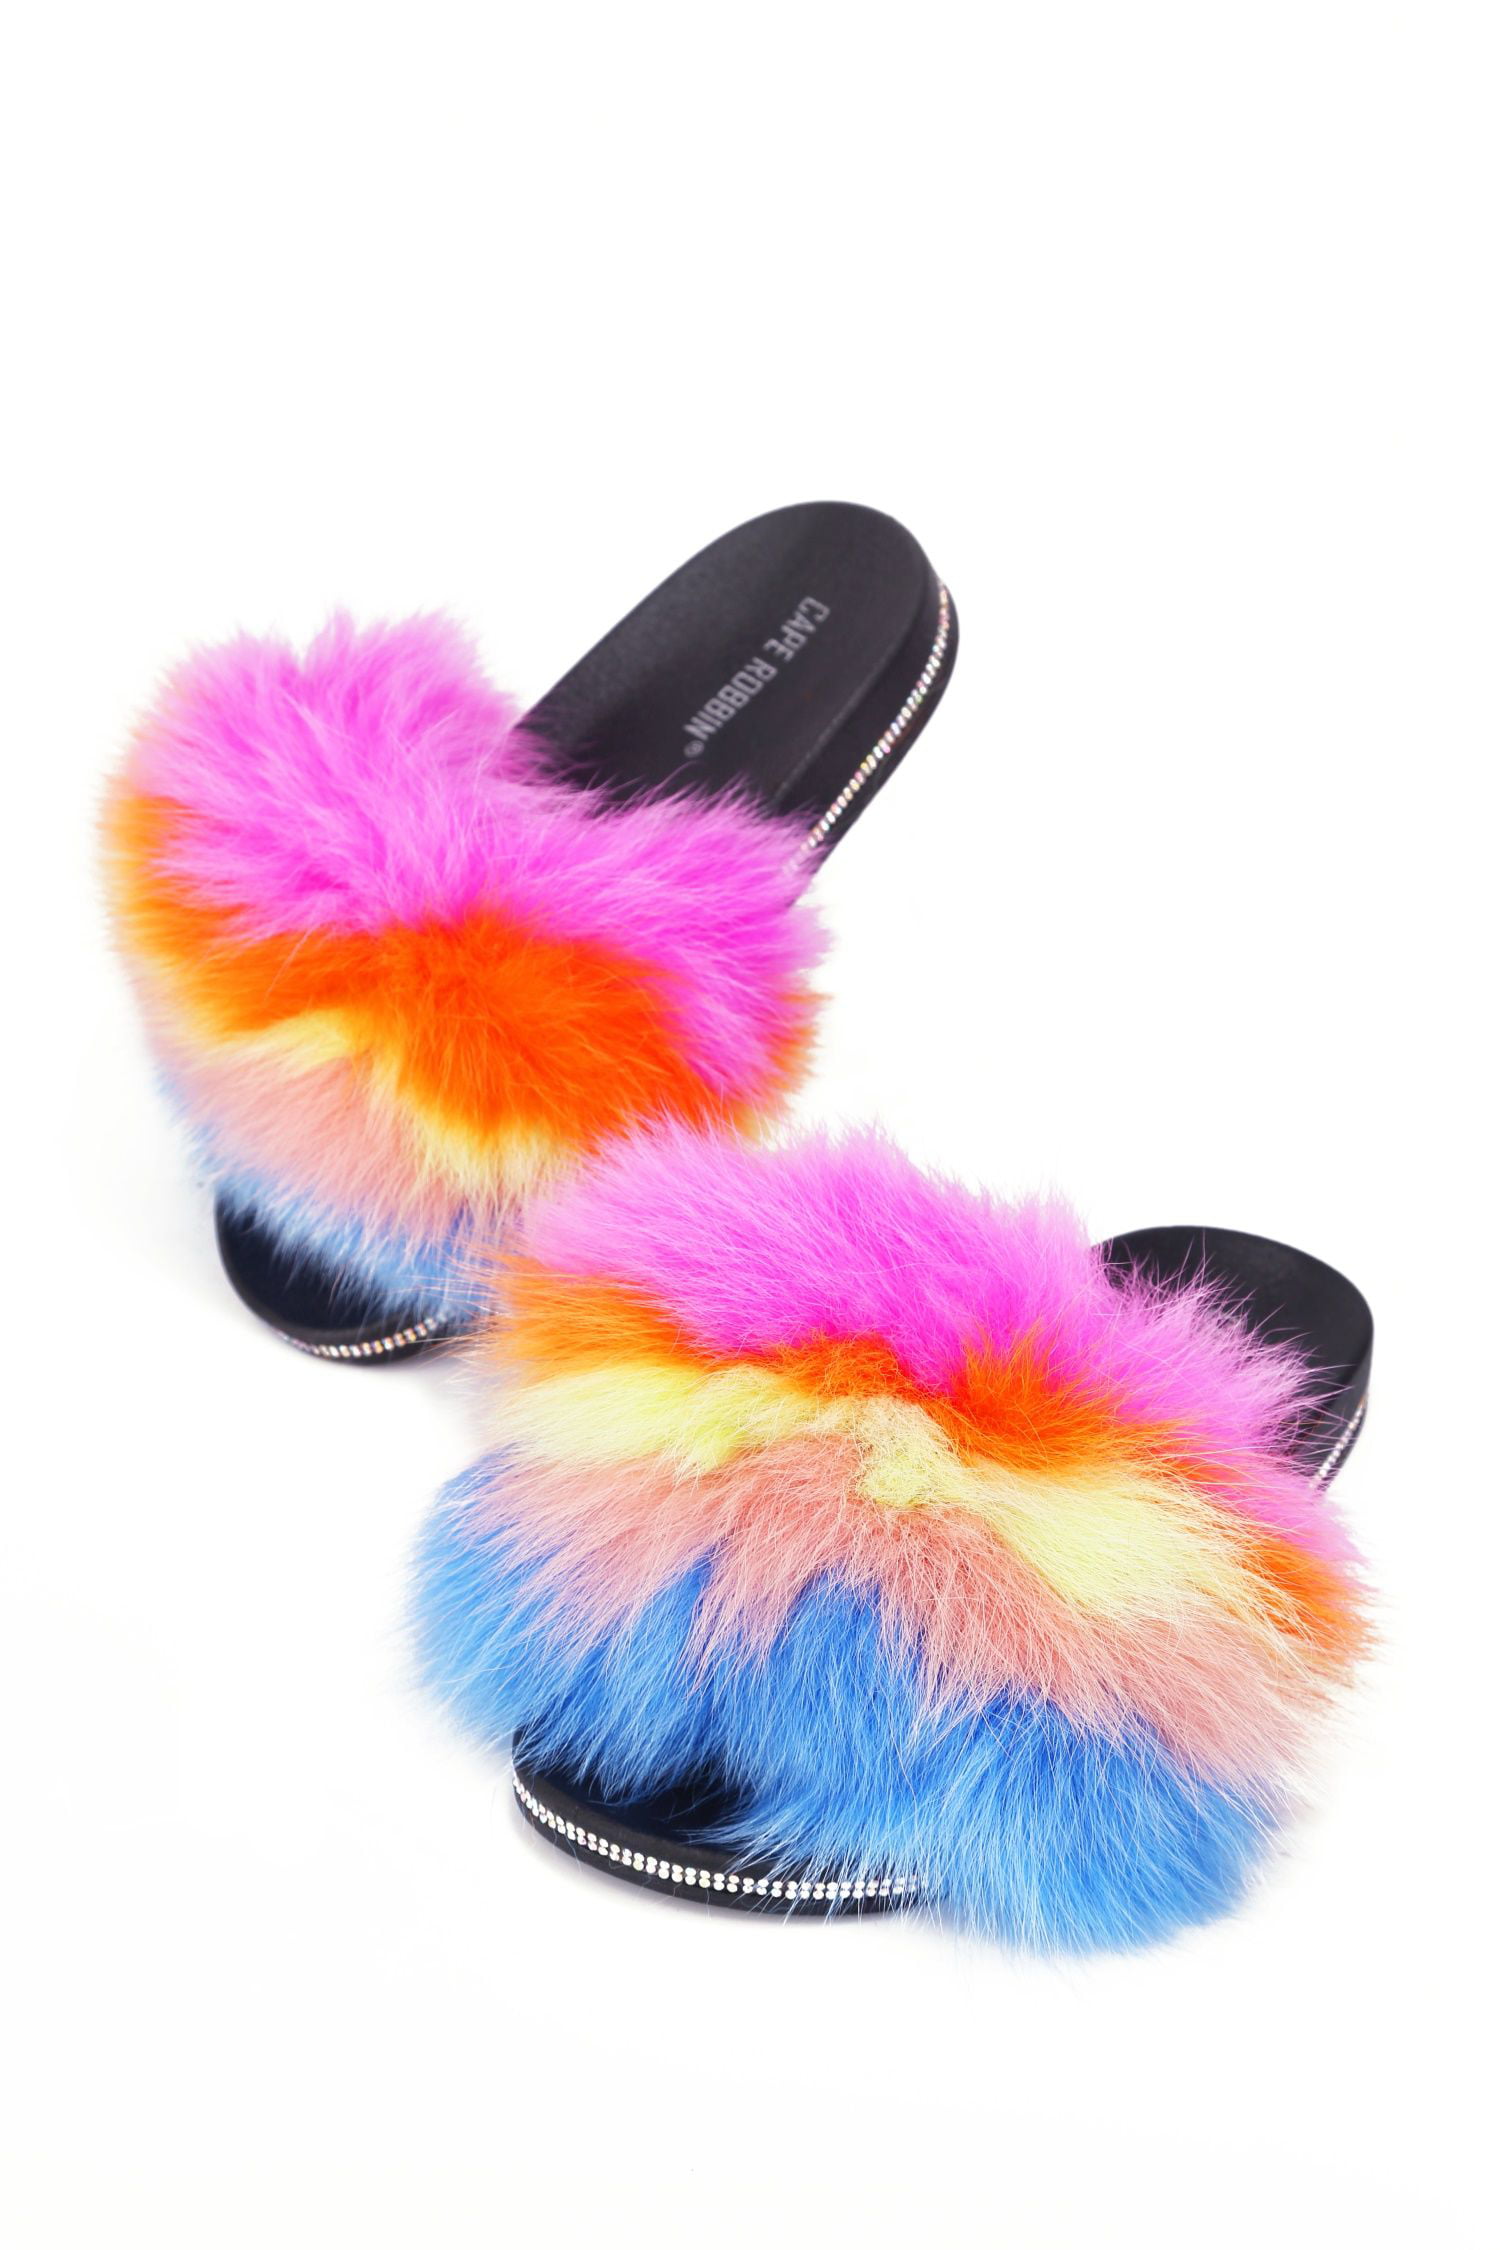 Cape Robbin Gale Nude Feather Furry Flat Thong Flip Flop Fashion Slide Sandals